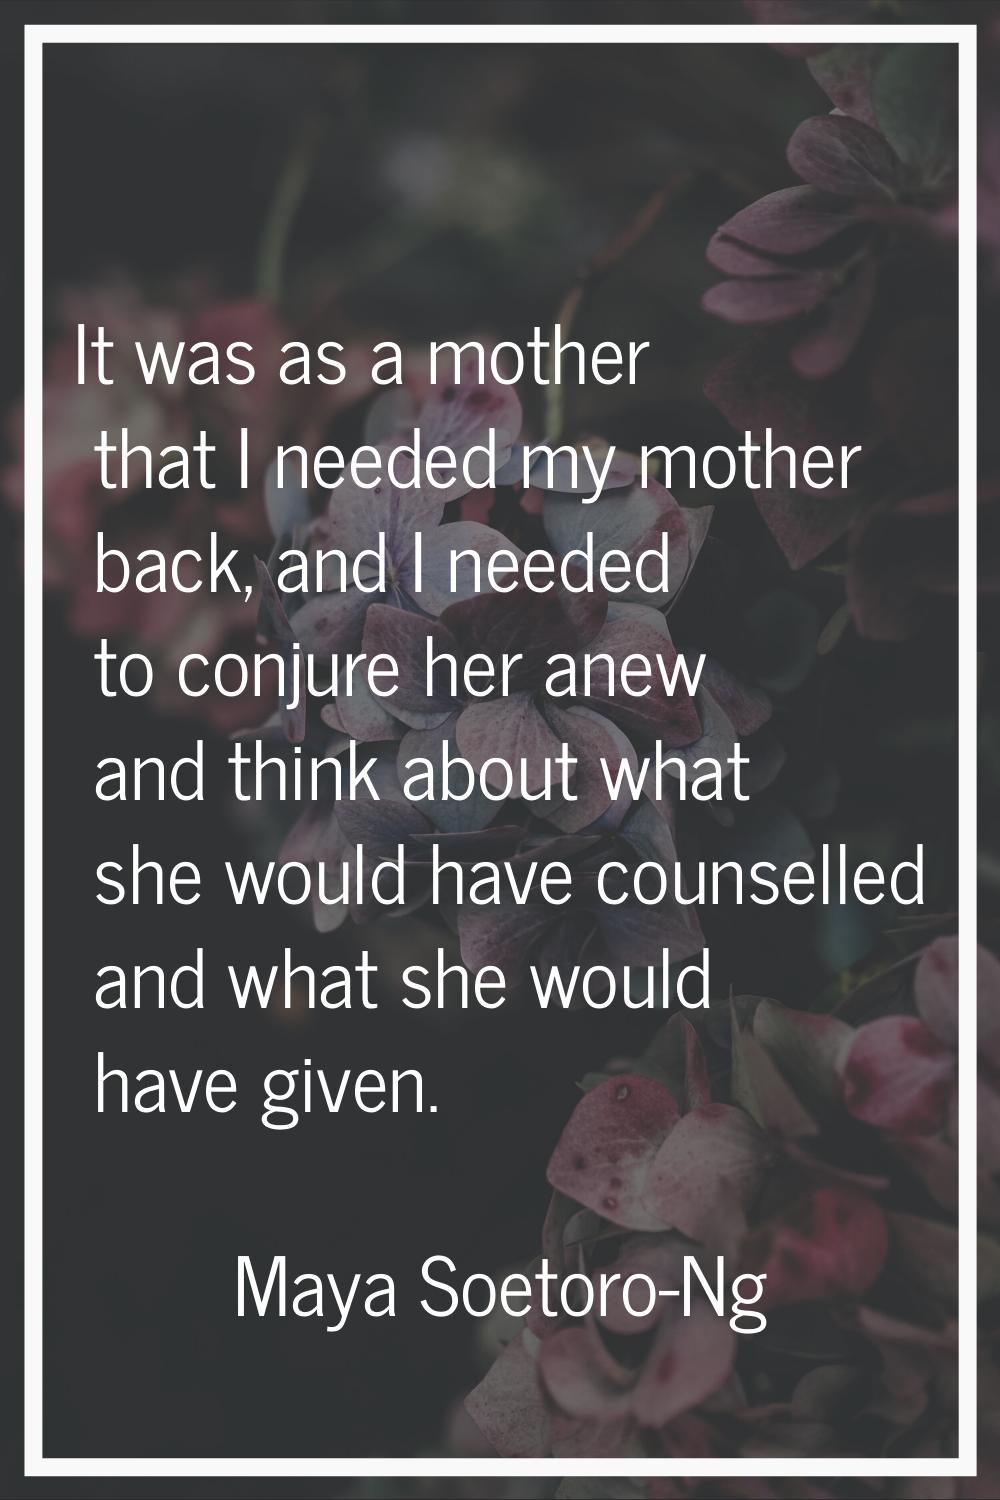 It was as a mother that I needed my mother back, and I needed to conjure her anew and think about w